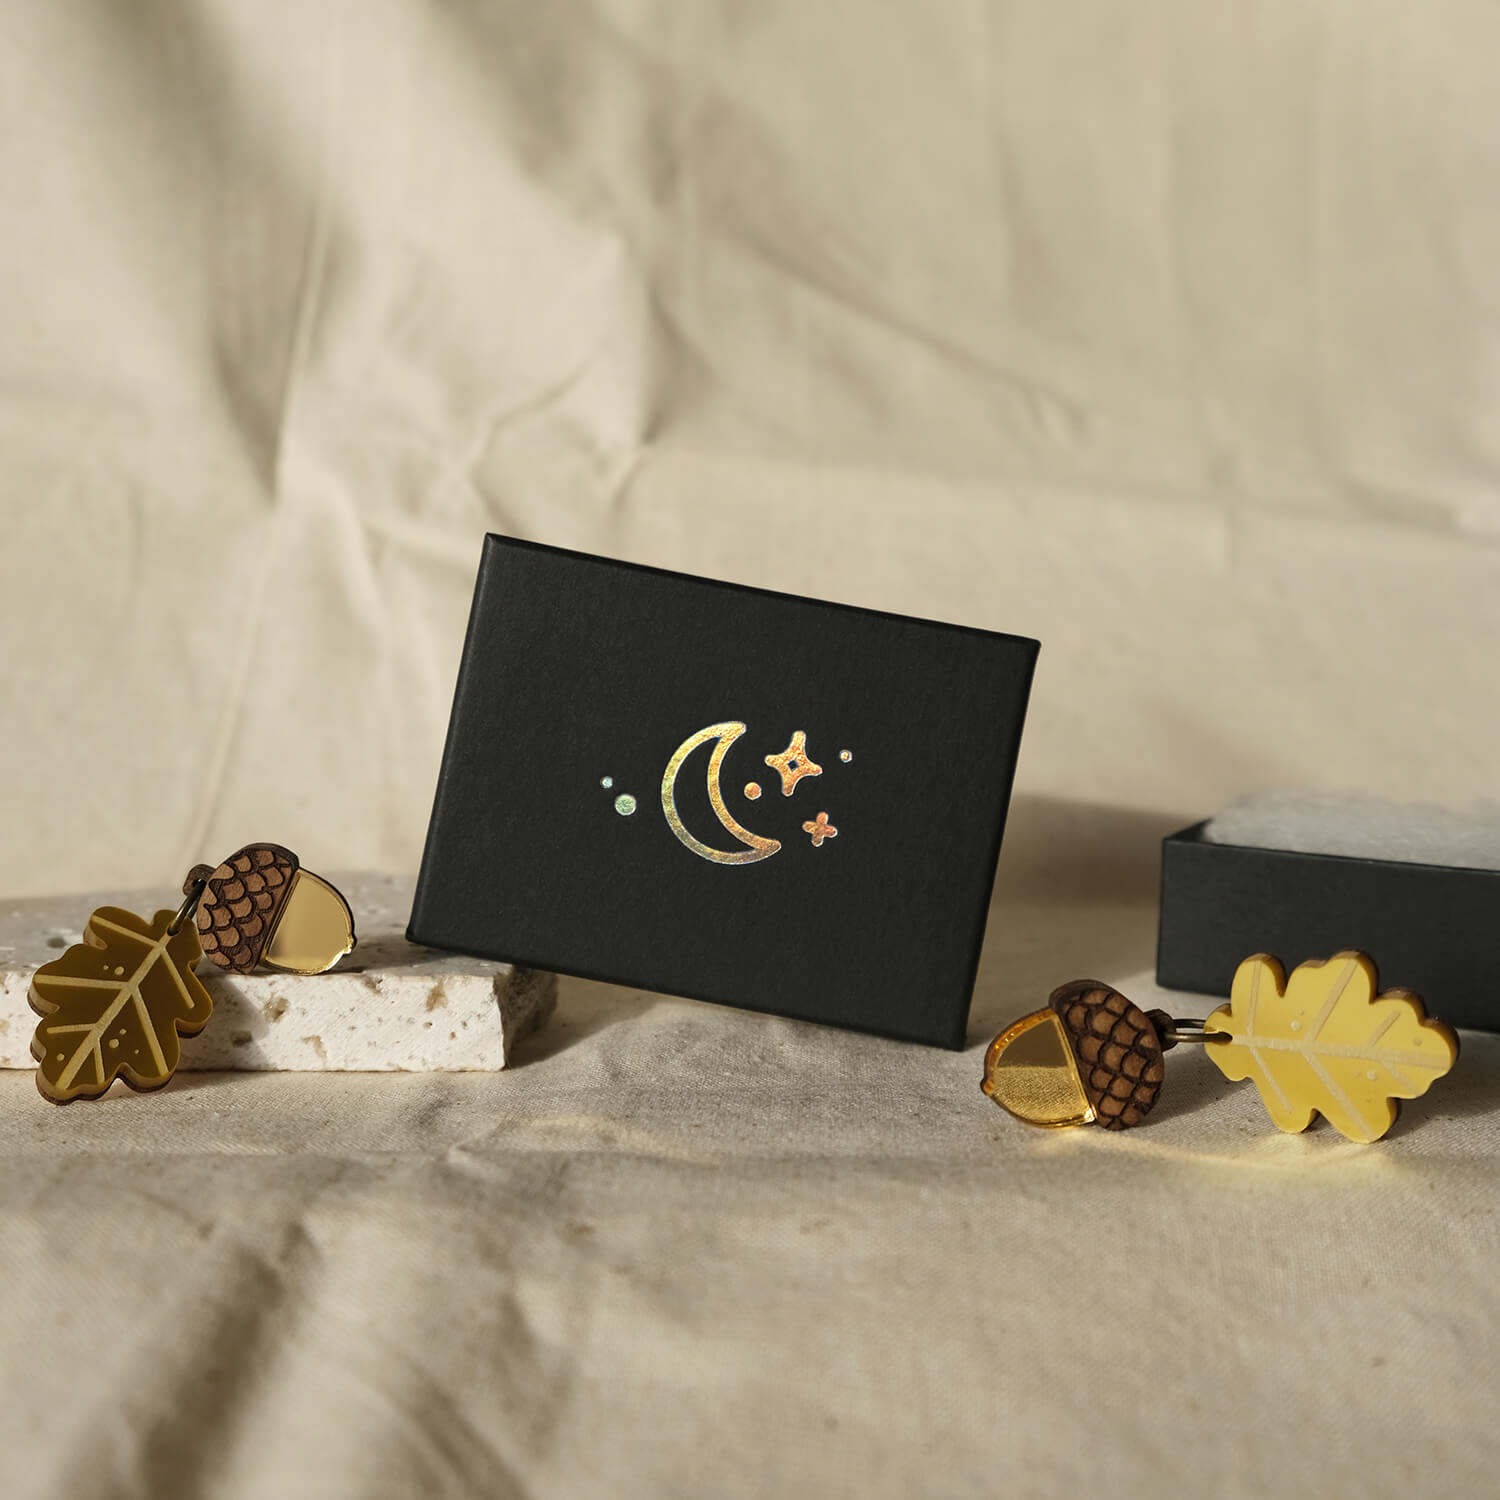 Oak Leaf and Acorn Brooches with Eco-Friendly Gift Box - The Moonlit Press